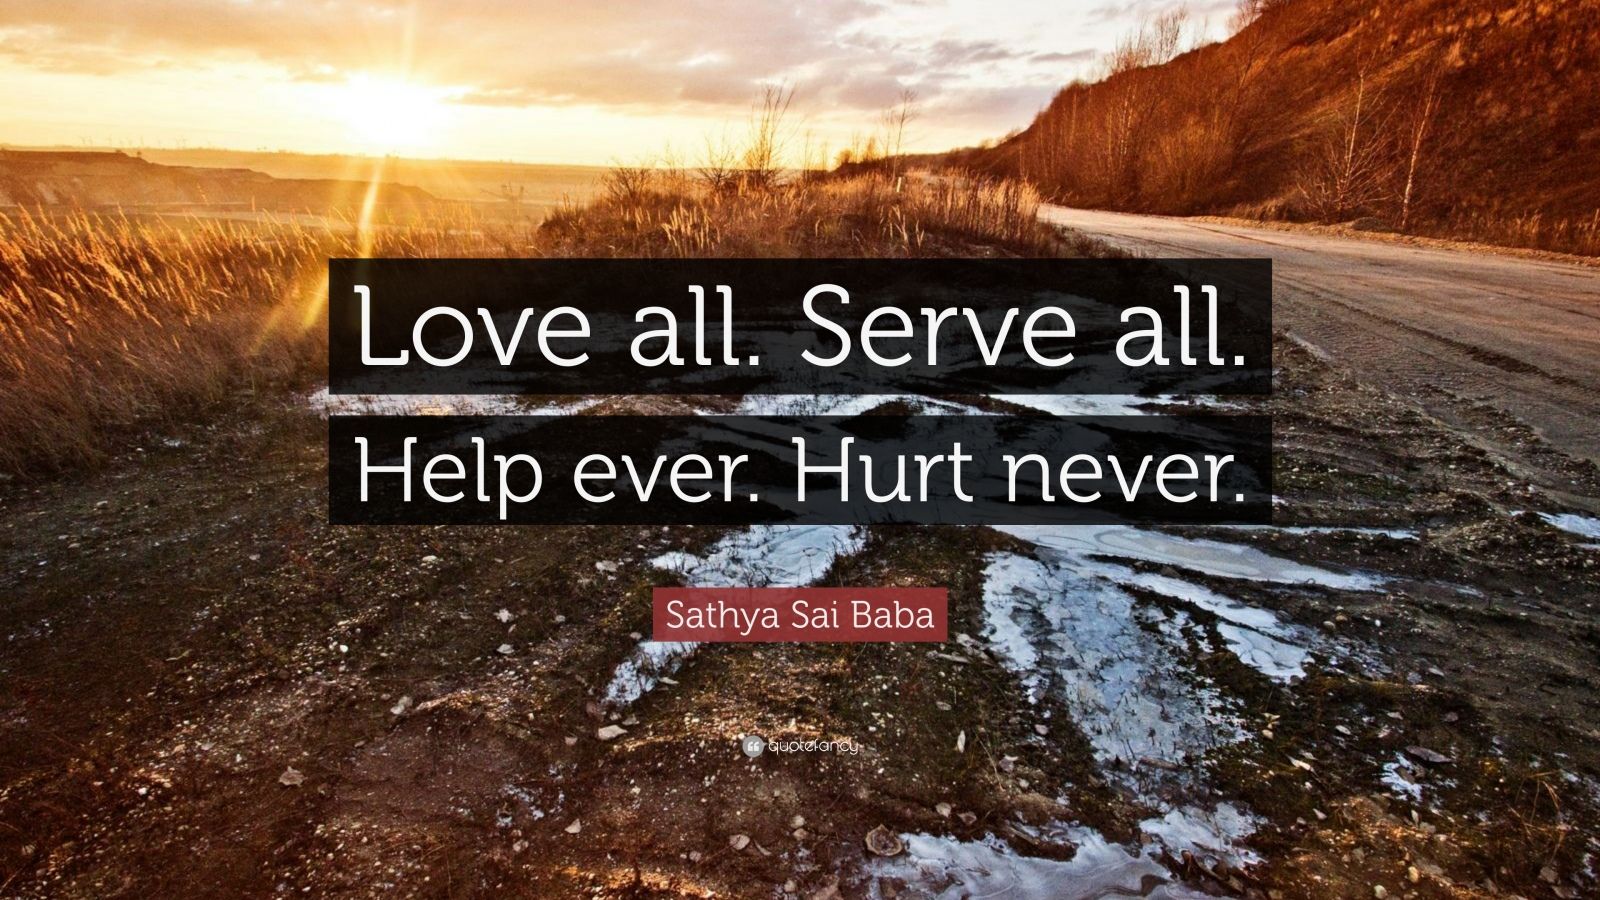 essay on love all serve all